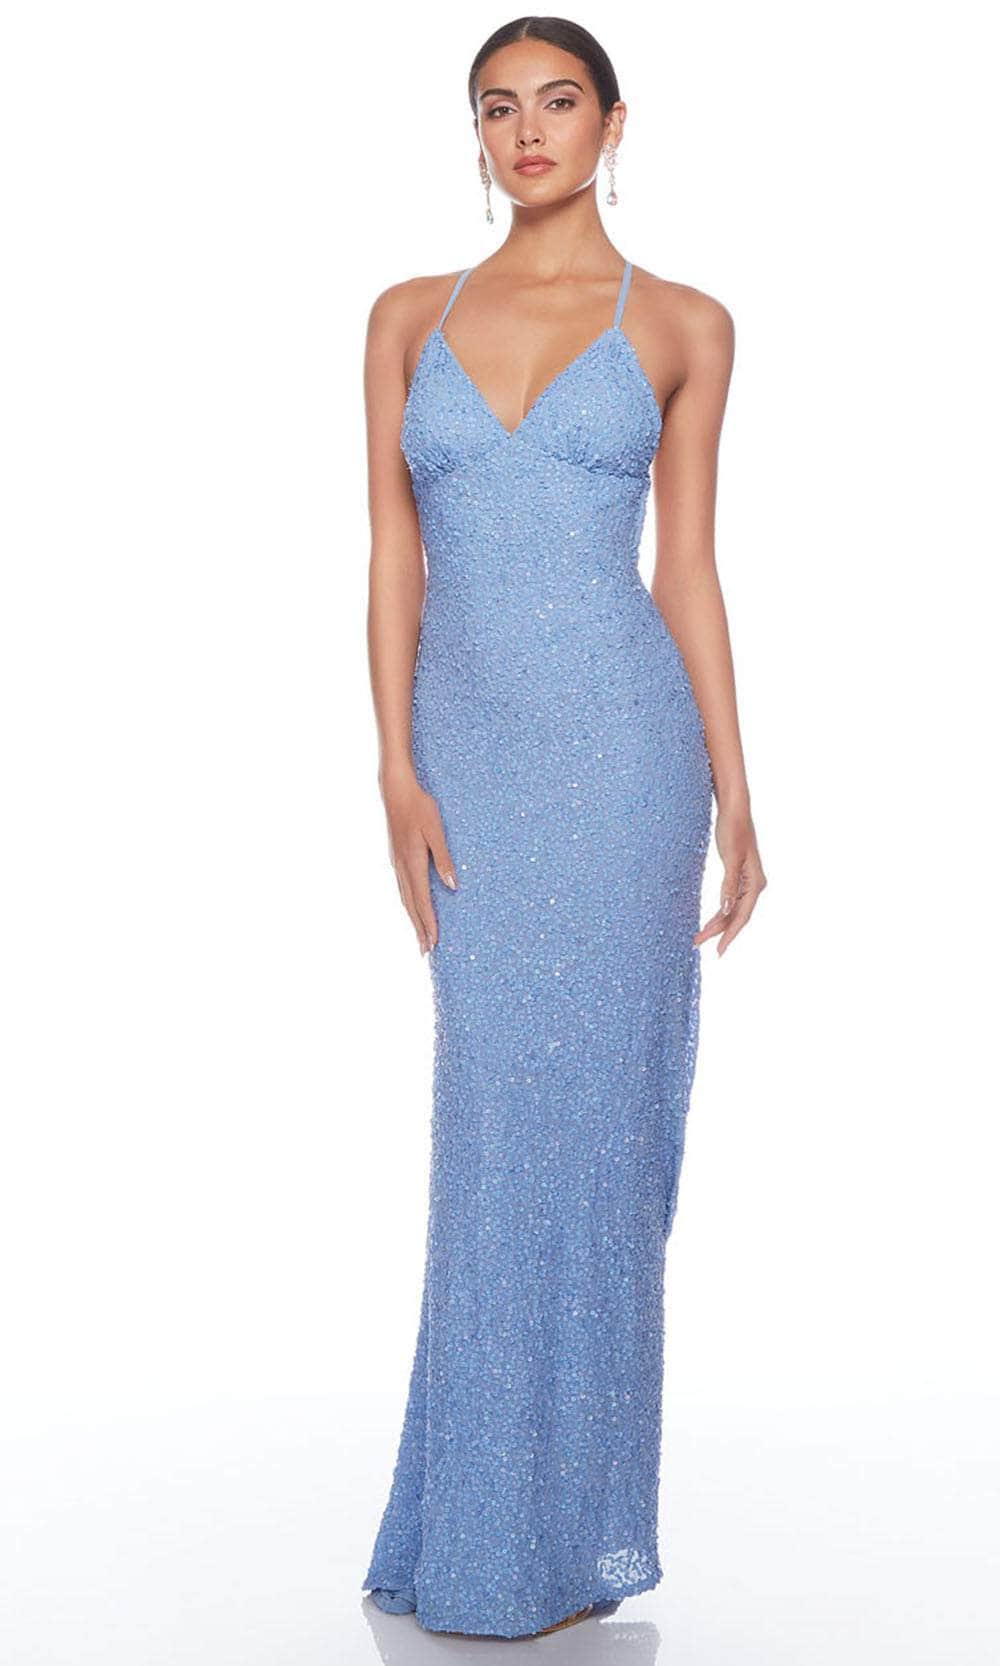 Image of Alyce Paris 88003 - Fitted Sequin Evening Dress